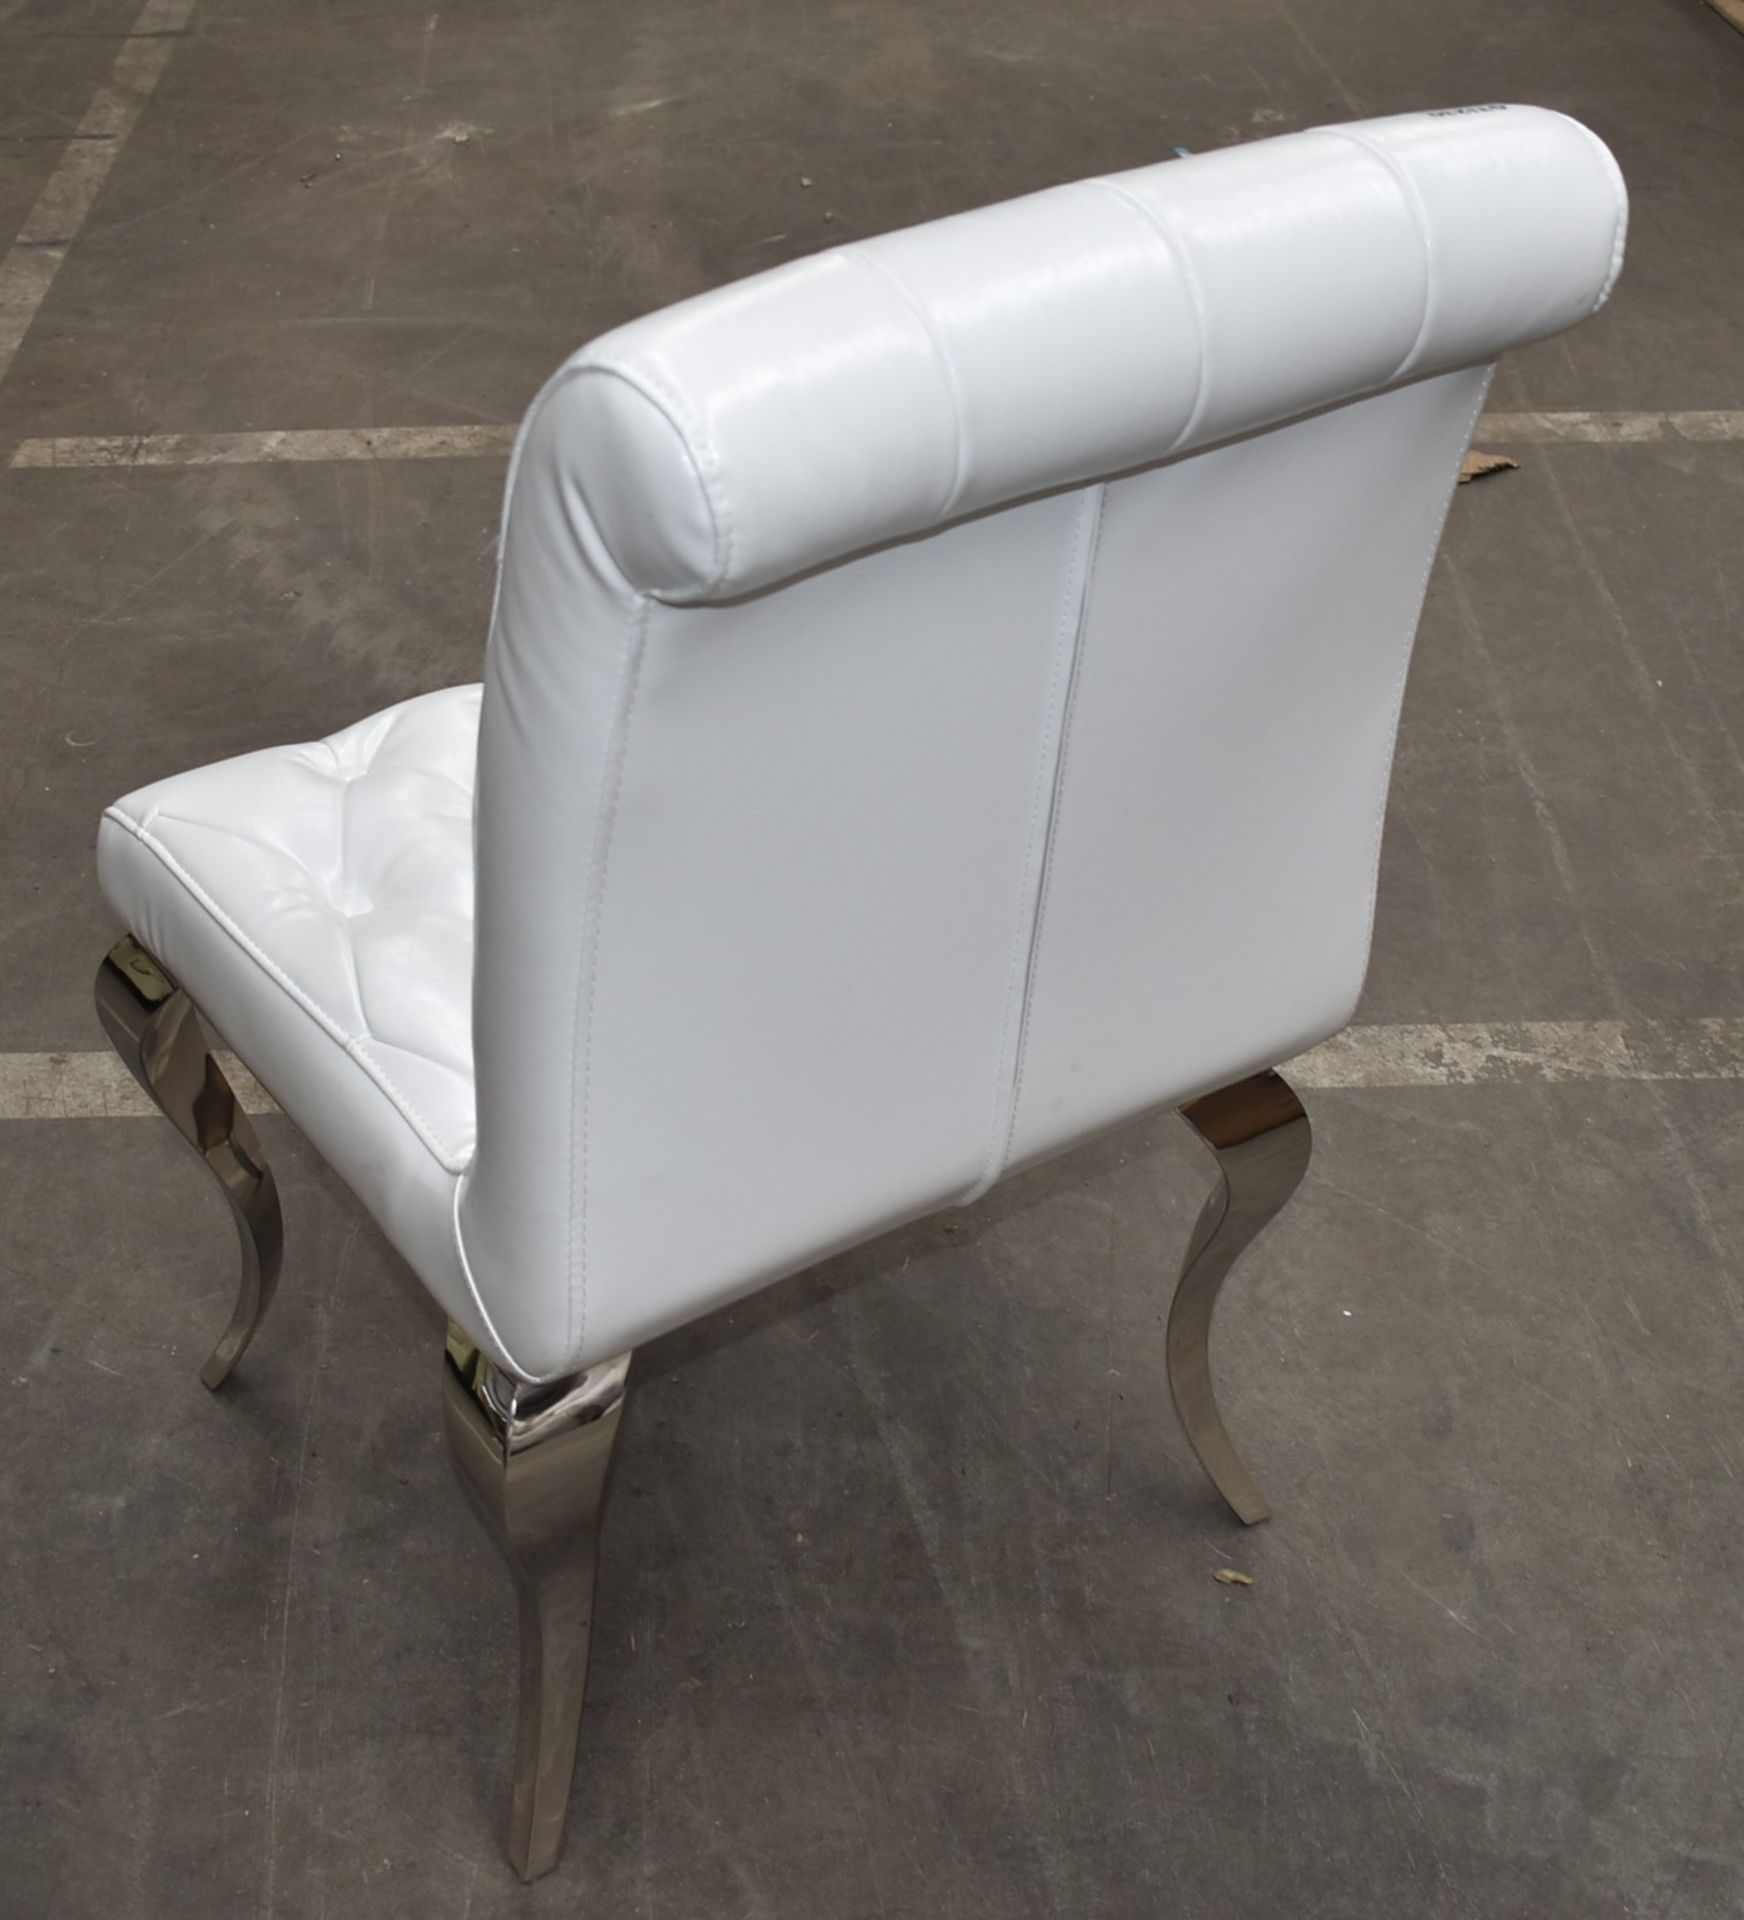 1 x Elegant White Leather Studded Bedroom Chair With Scroll Back and Chrome Legs - CL999 - Ref - Image 2 of 6